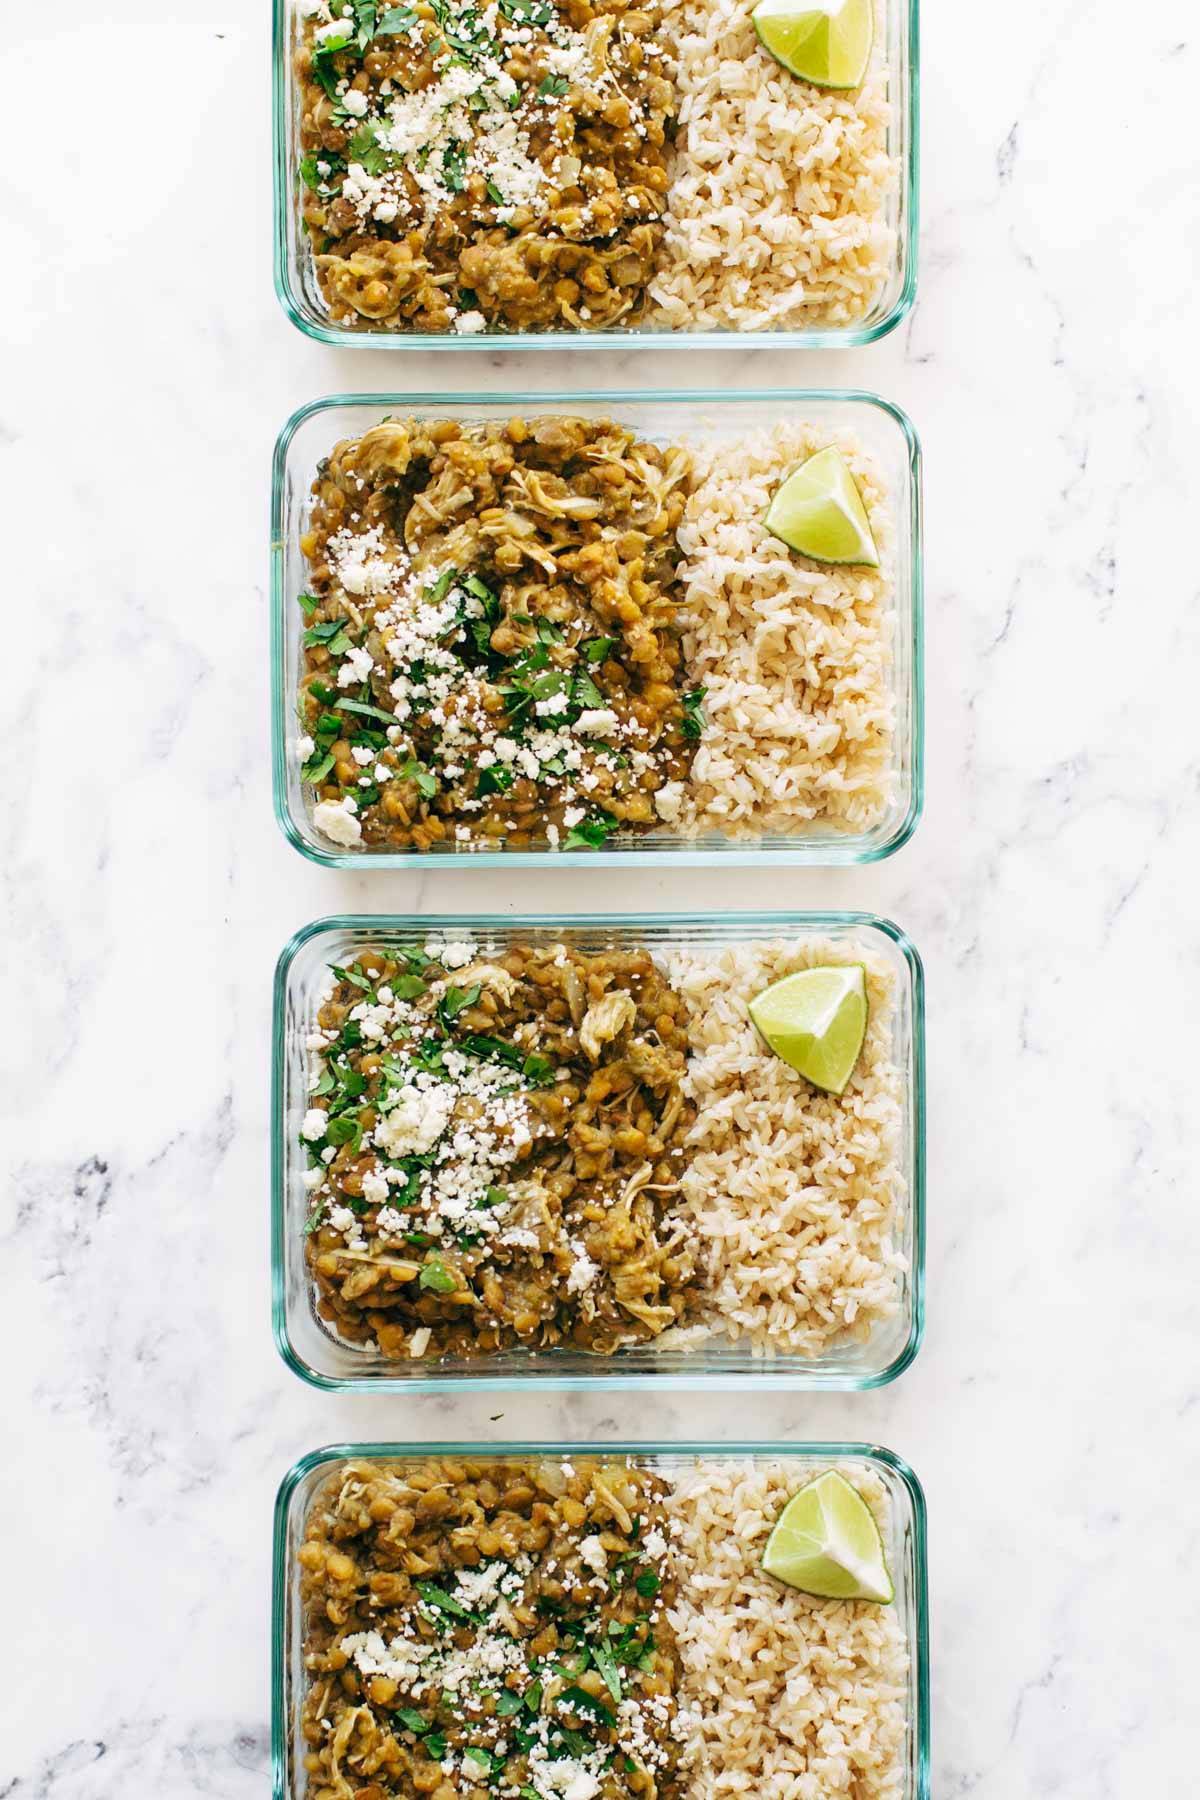 Cilantro Lime Chicken and Lentils in meal prep containers.